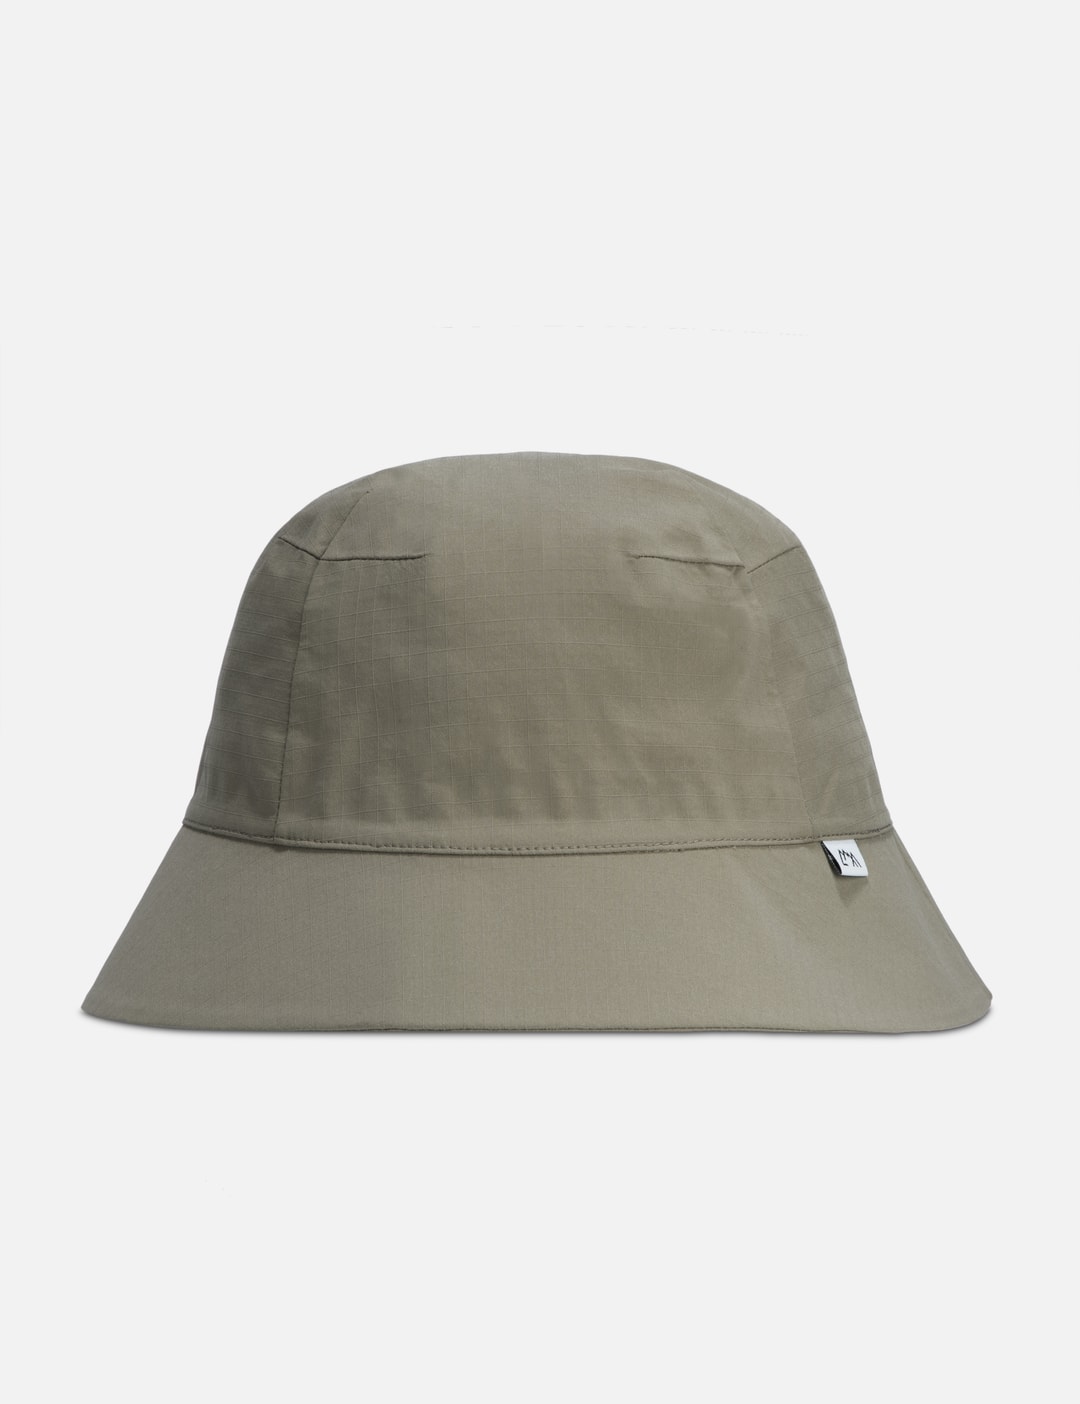 Comfy Outdoor Garment - Hikers Hat Coexist | HBX - Globally Curated ...